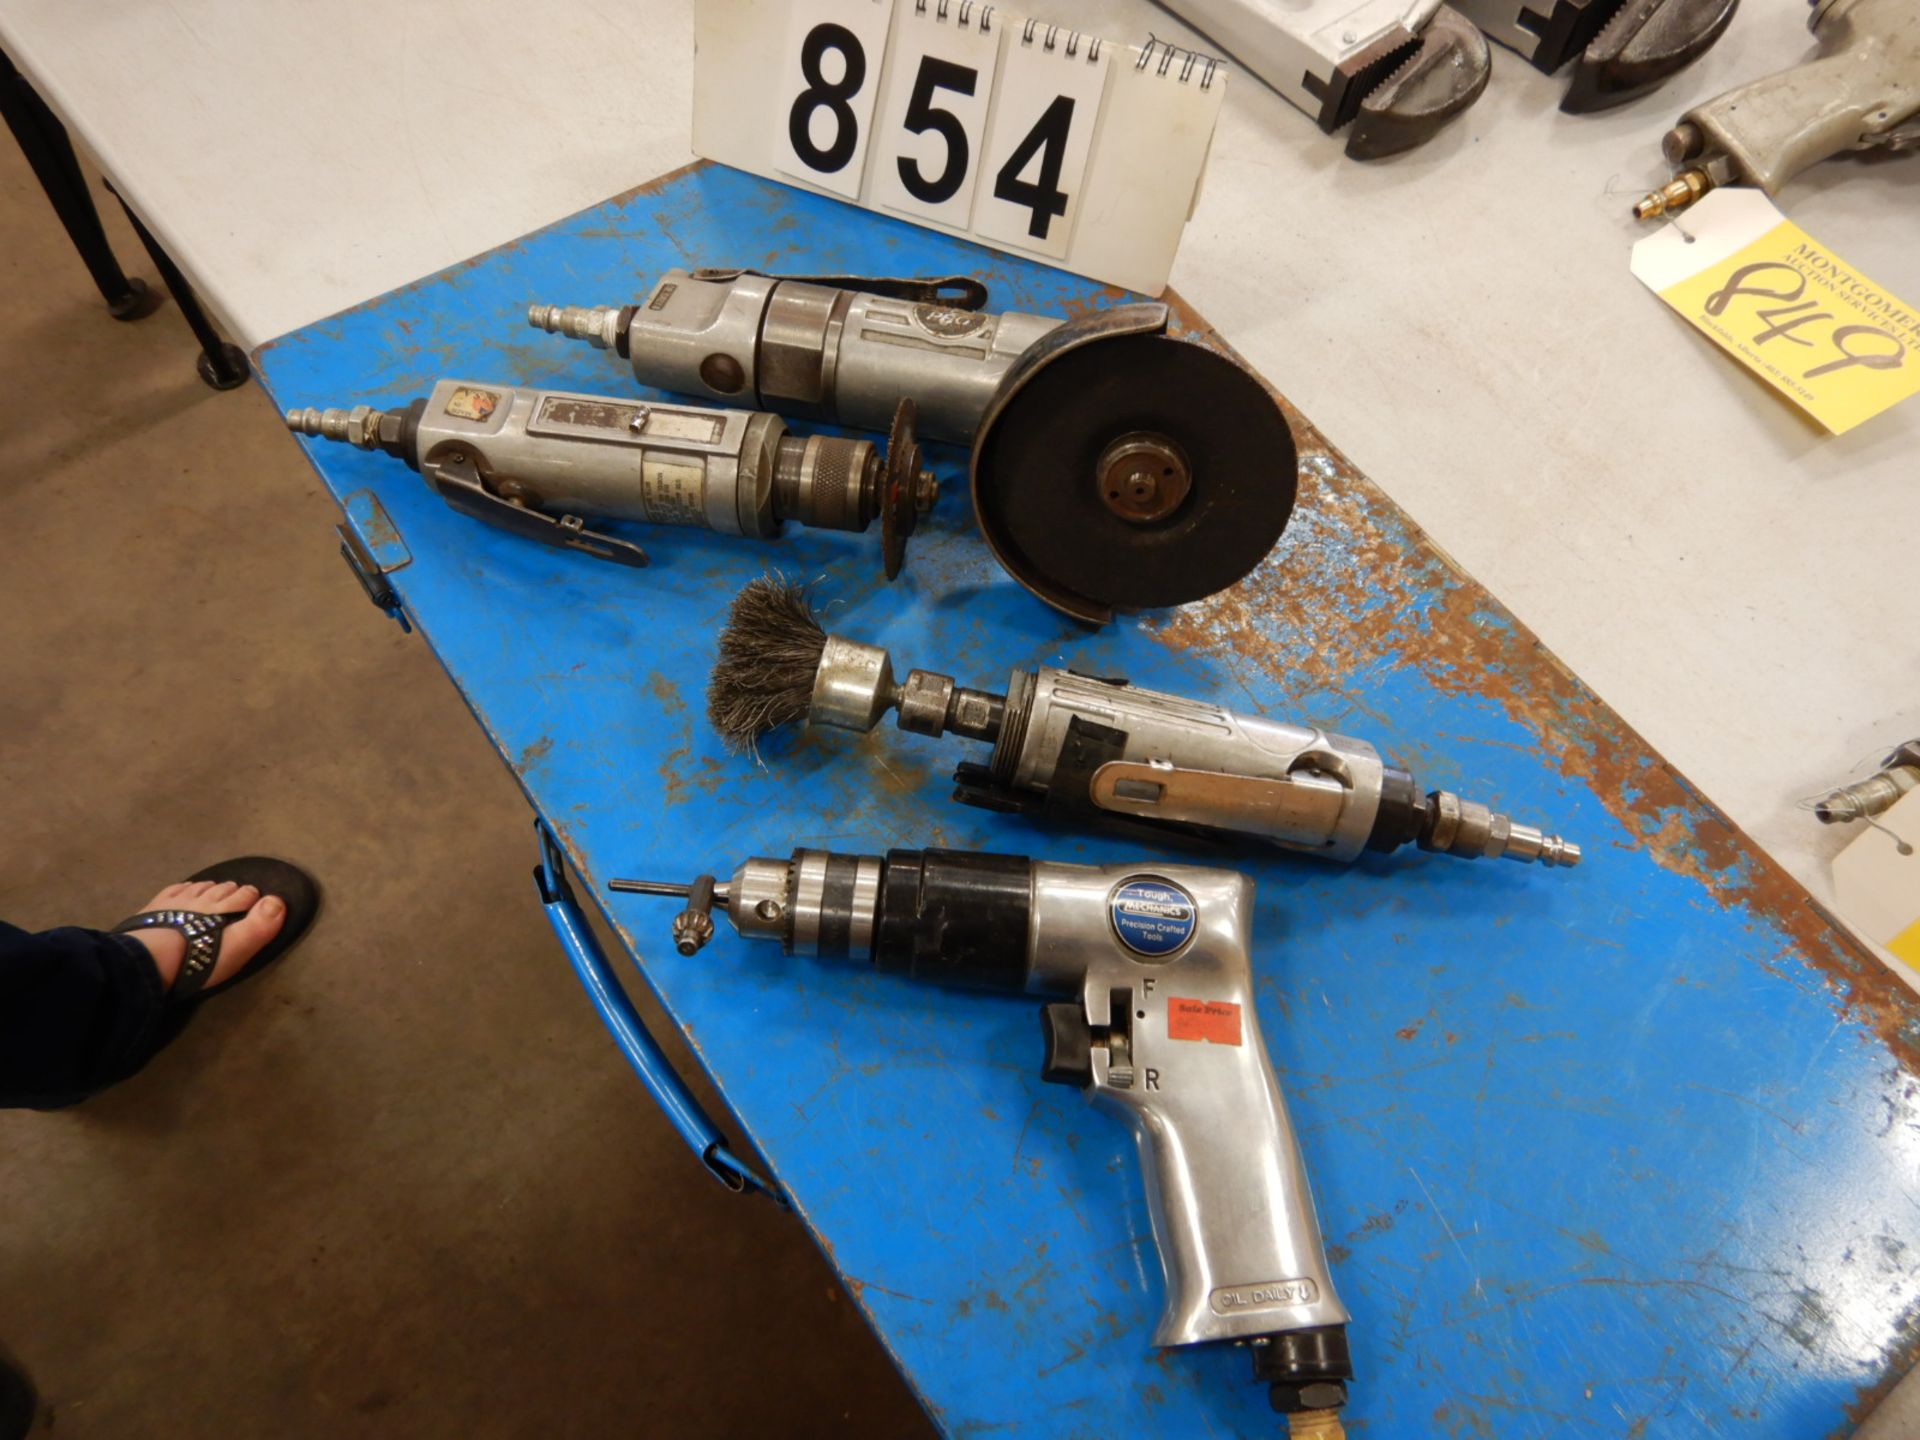 L/O AIR TOOLS INCLUDING 1-ANGLE GRINDER, 1-DRILL, 2-DIE GRINDERS